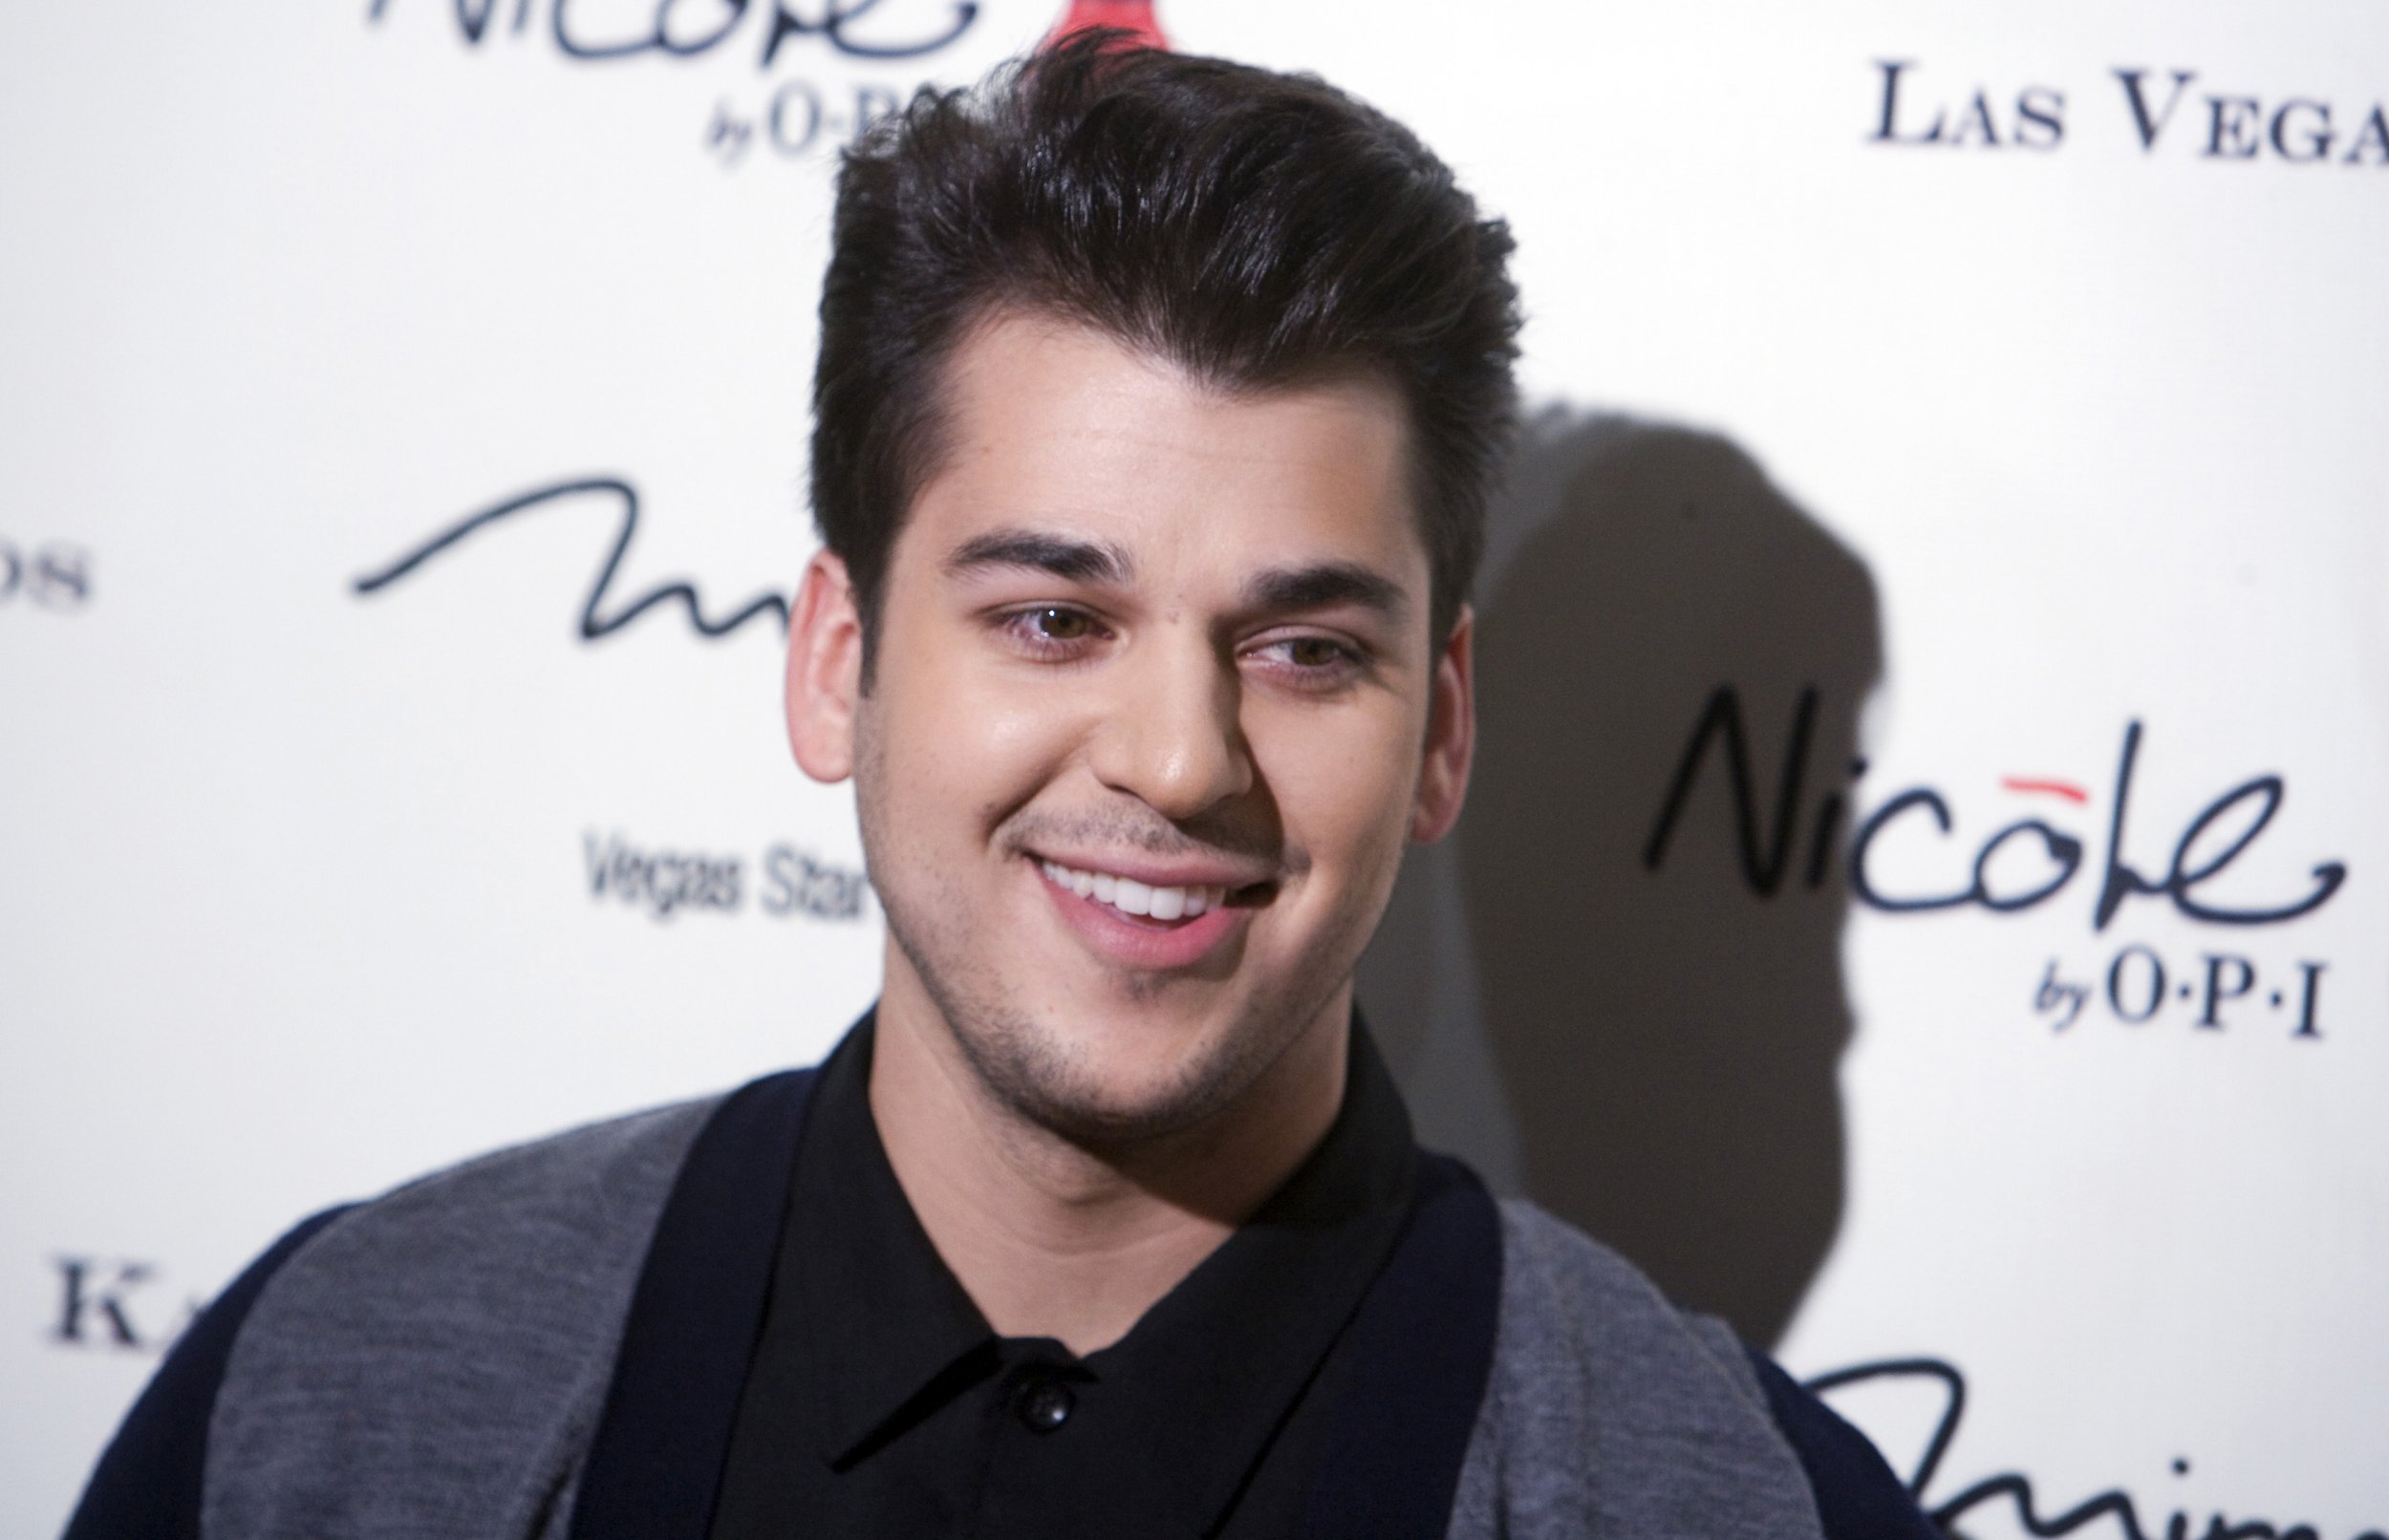 Rob Kardashian Continues To Show Off Weight Loss Progress In Latest Instagram Posts Ibtimes